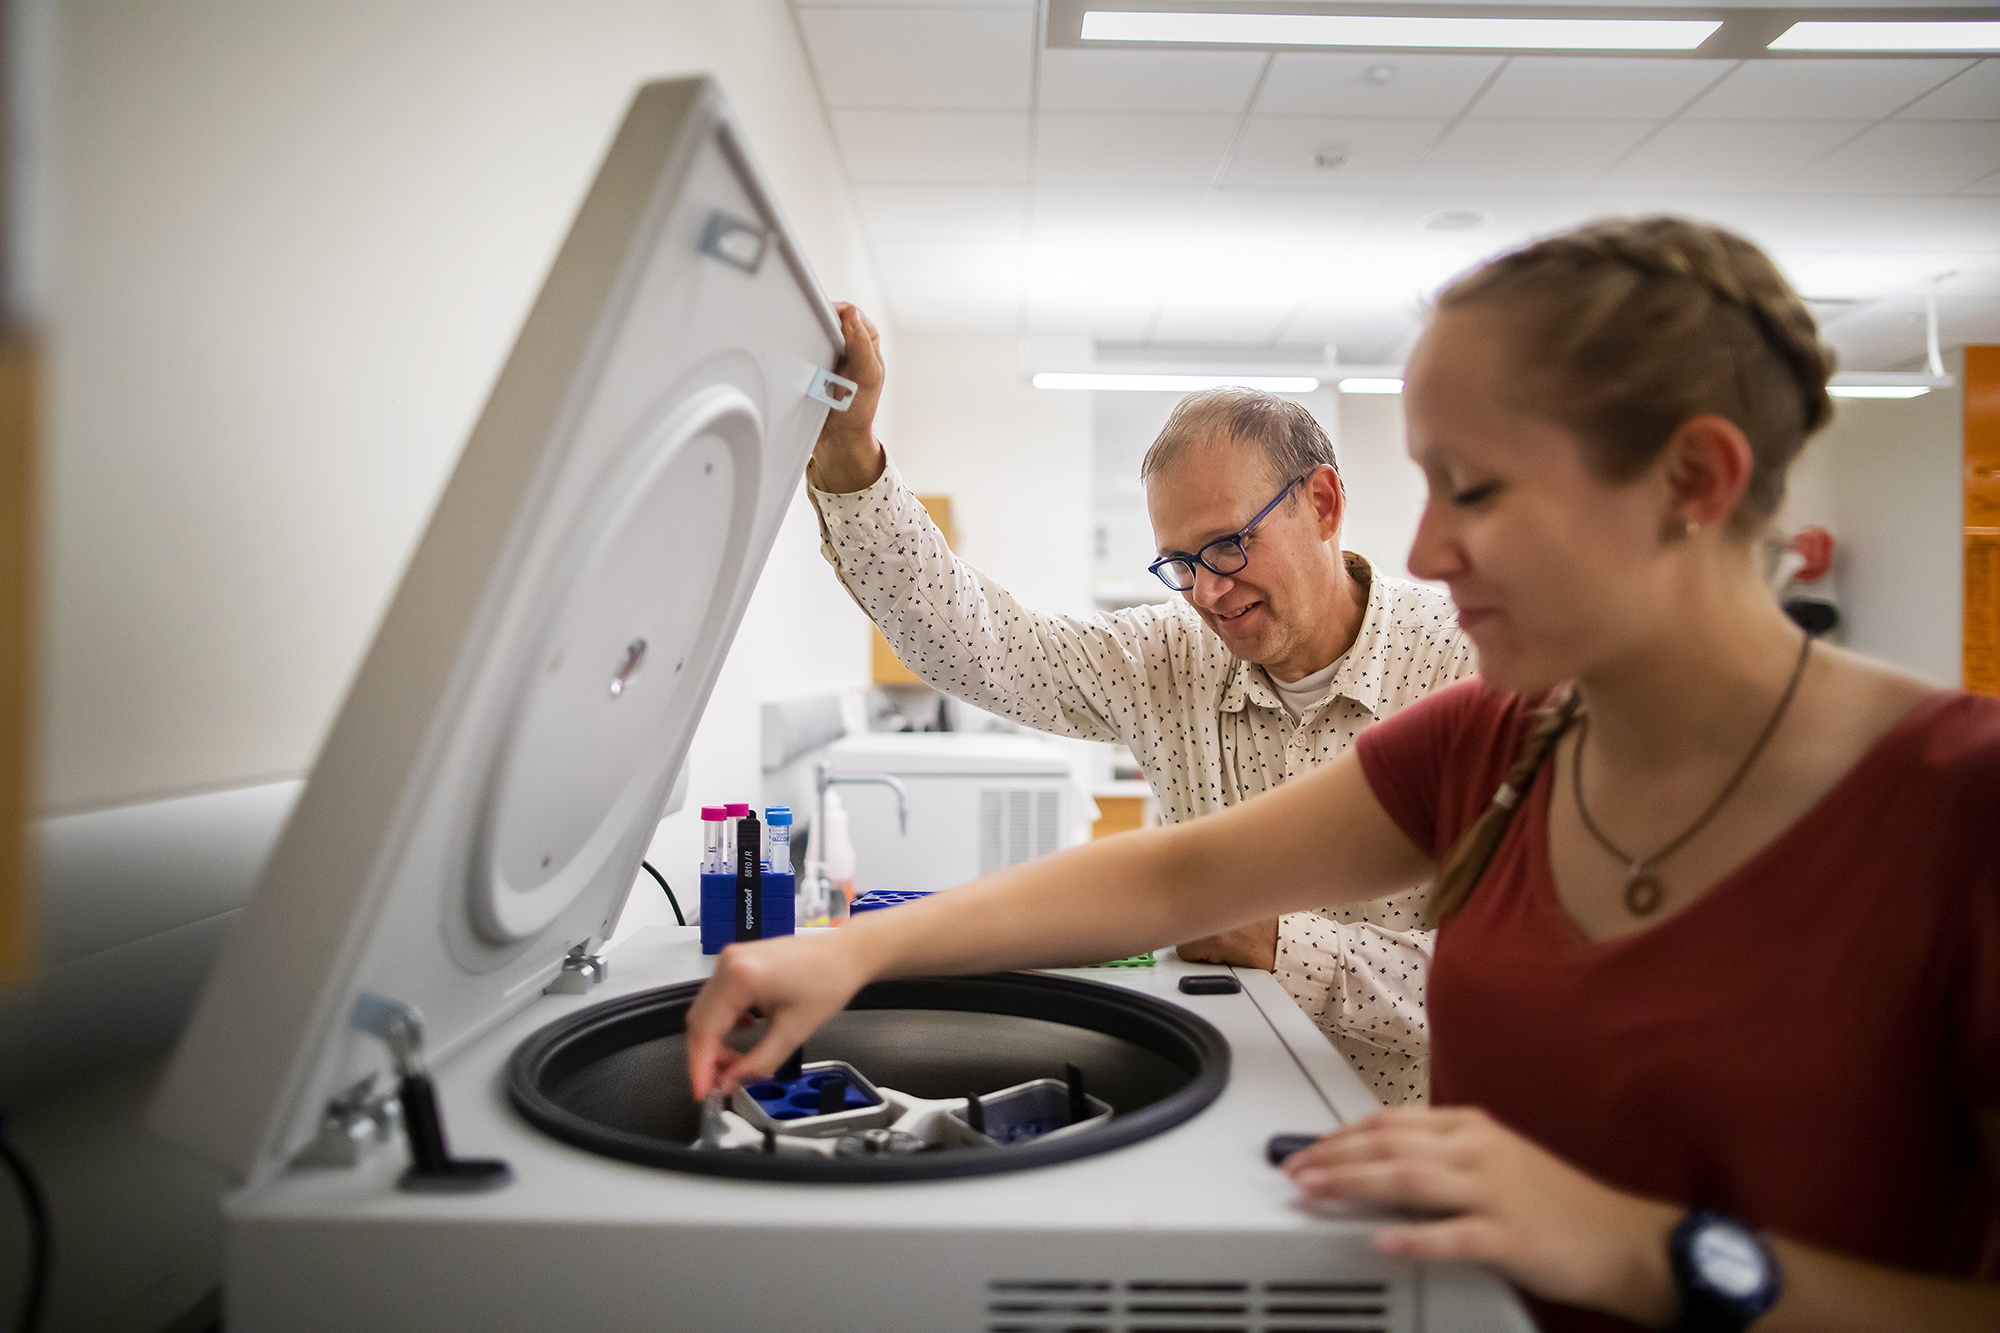 john wagner helping student with a centrifuge